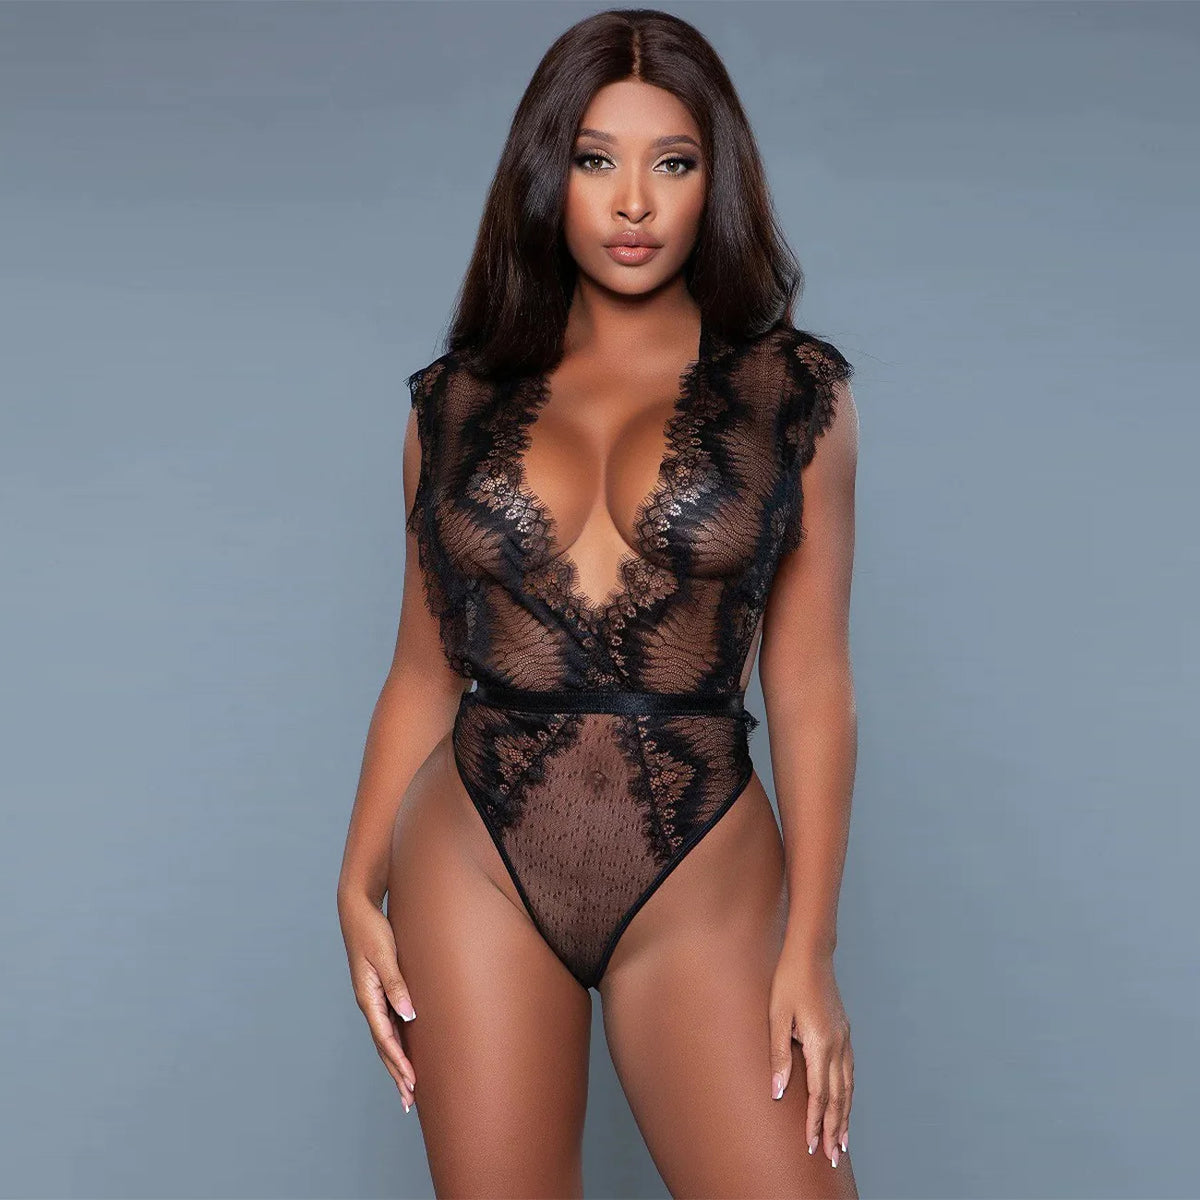 Plunging Neckline Bodysuit with Cross-Cover